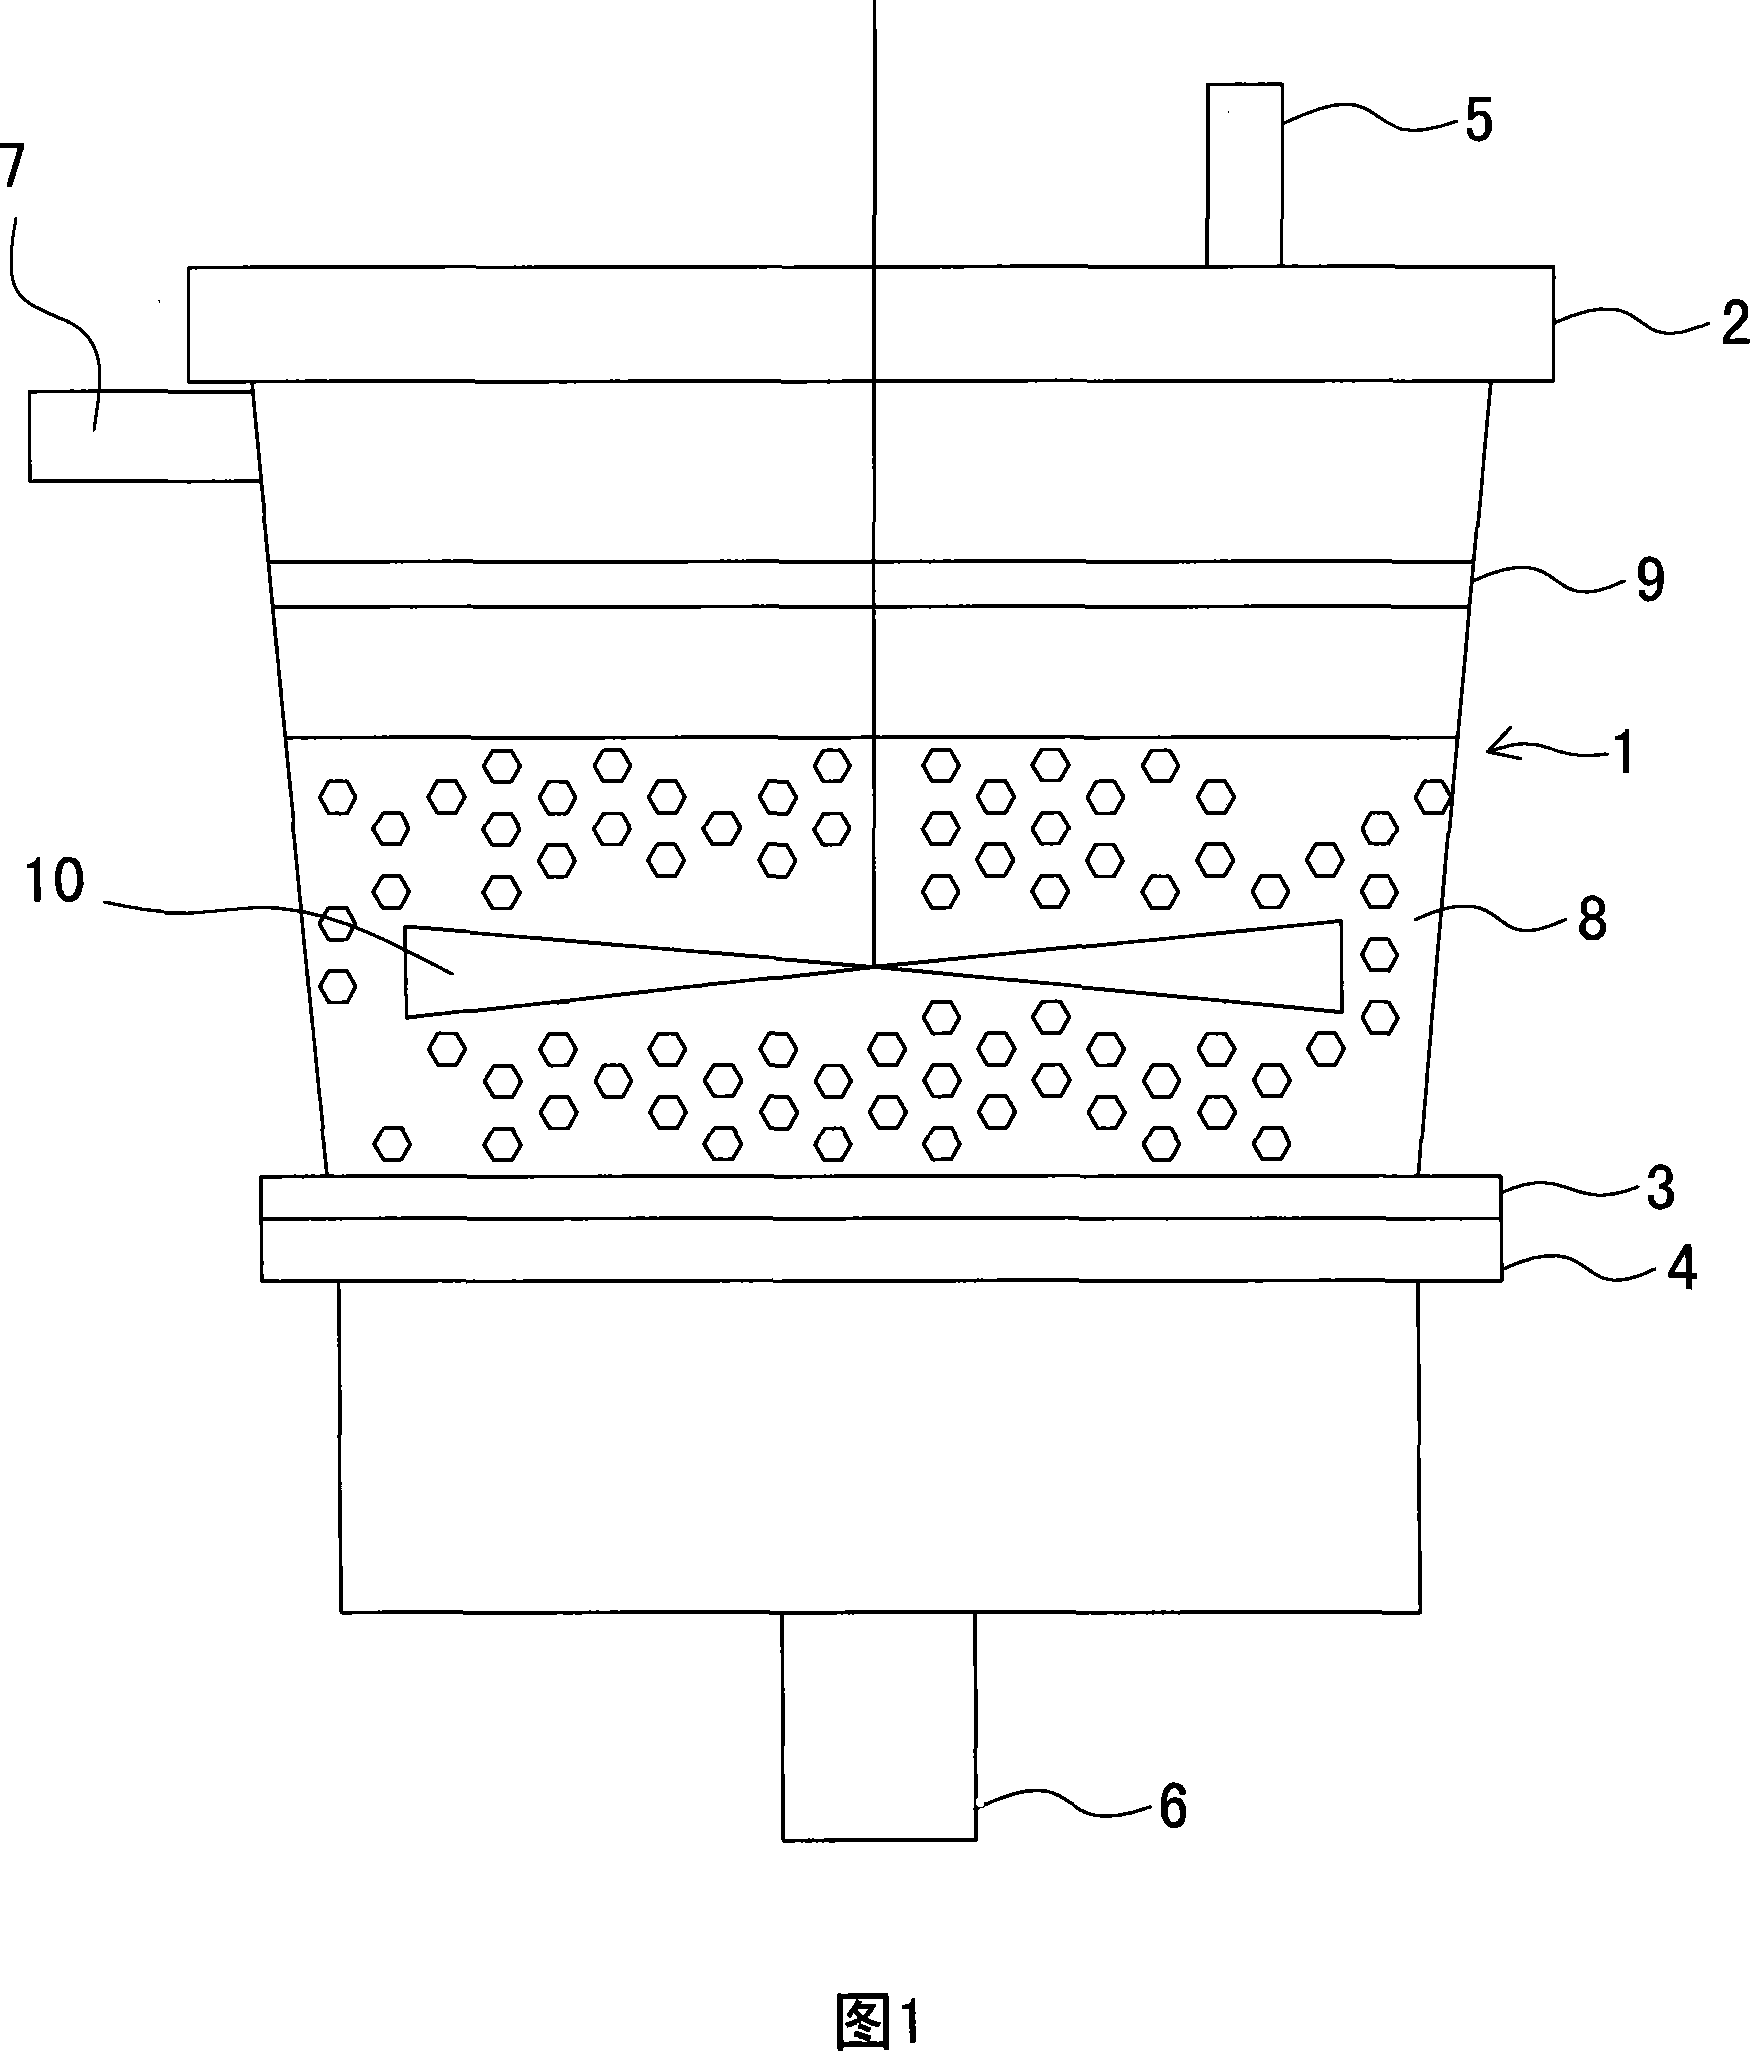 Method and apparatus for processing fluid-bed of oily wastewater